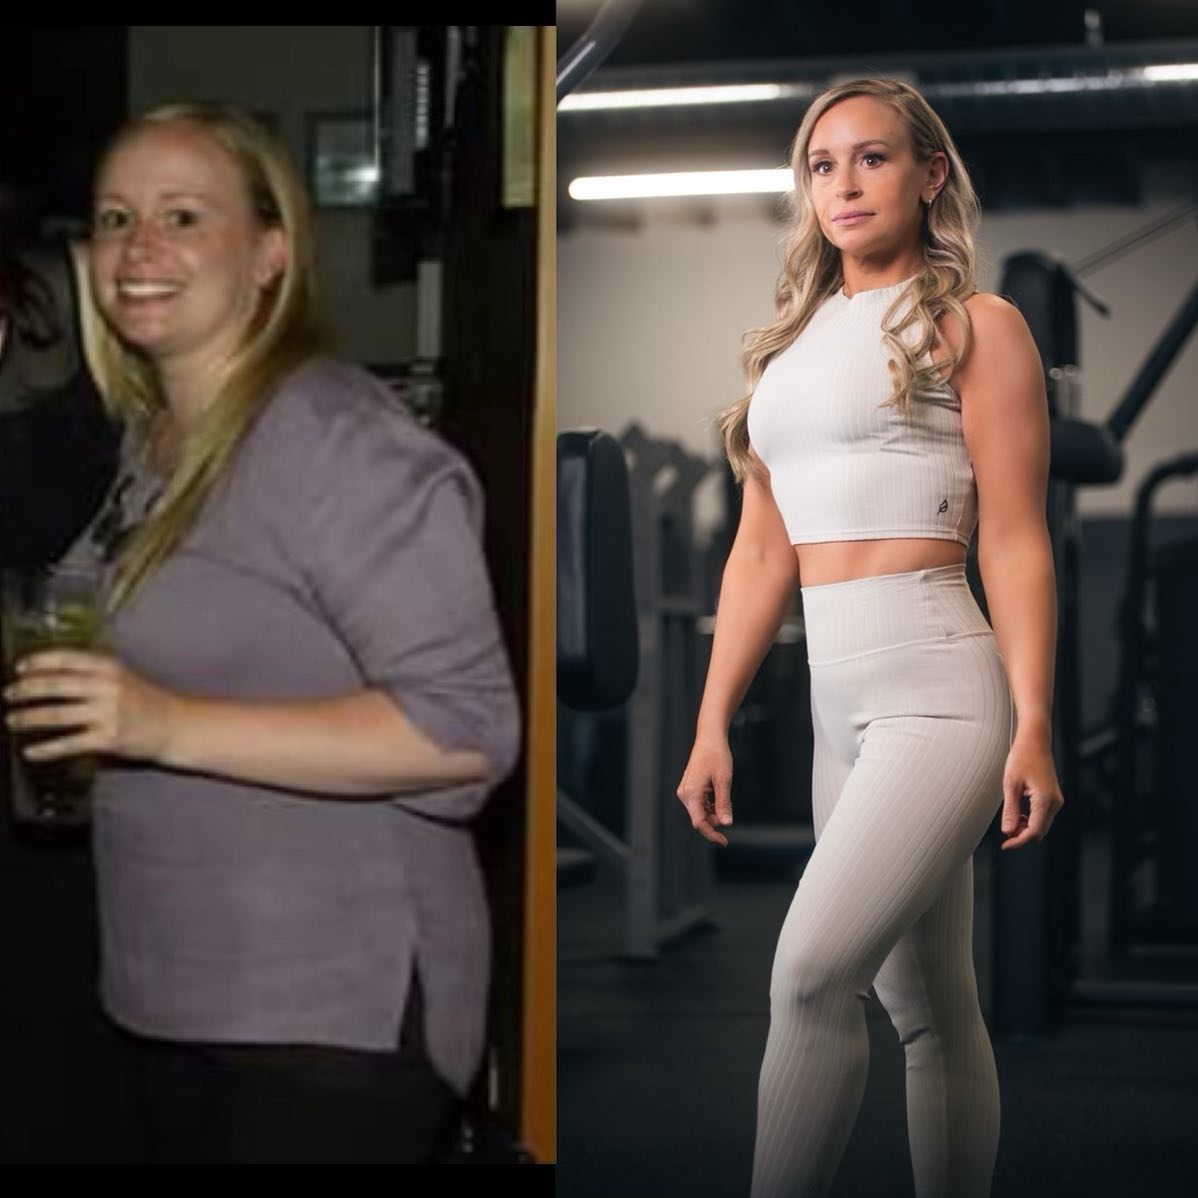 Client transformation. Split down the middle, the left image is a before shot of a female holding a drink. The right image is an after shot of her transformation posing in a gym for the photo.